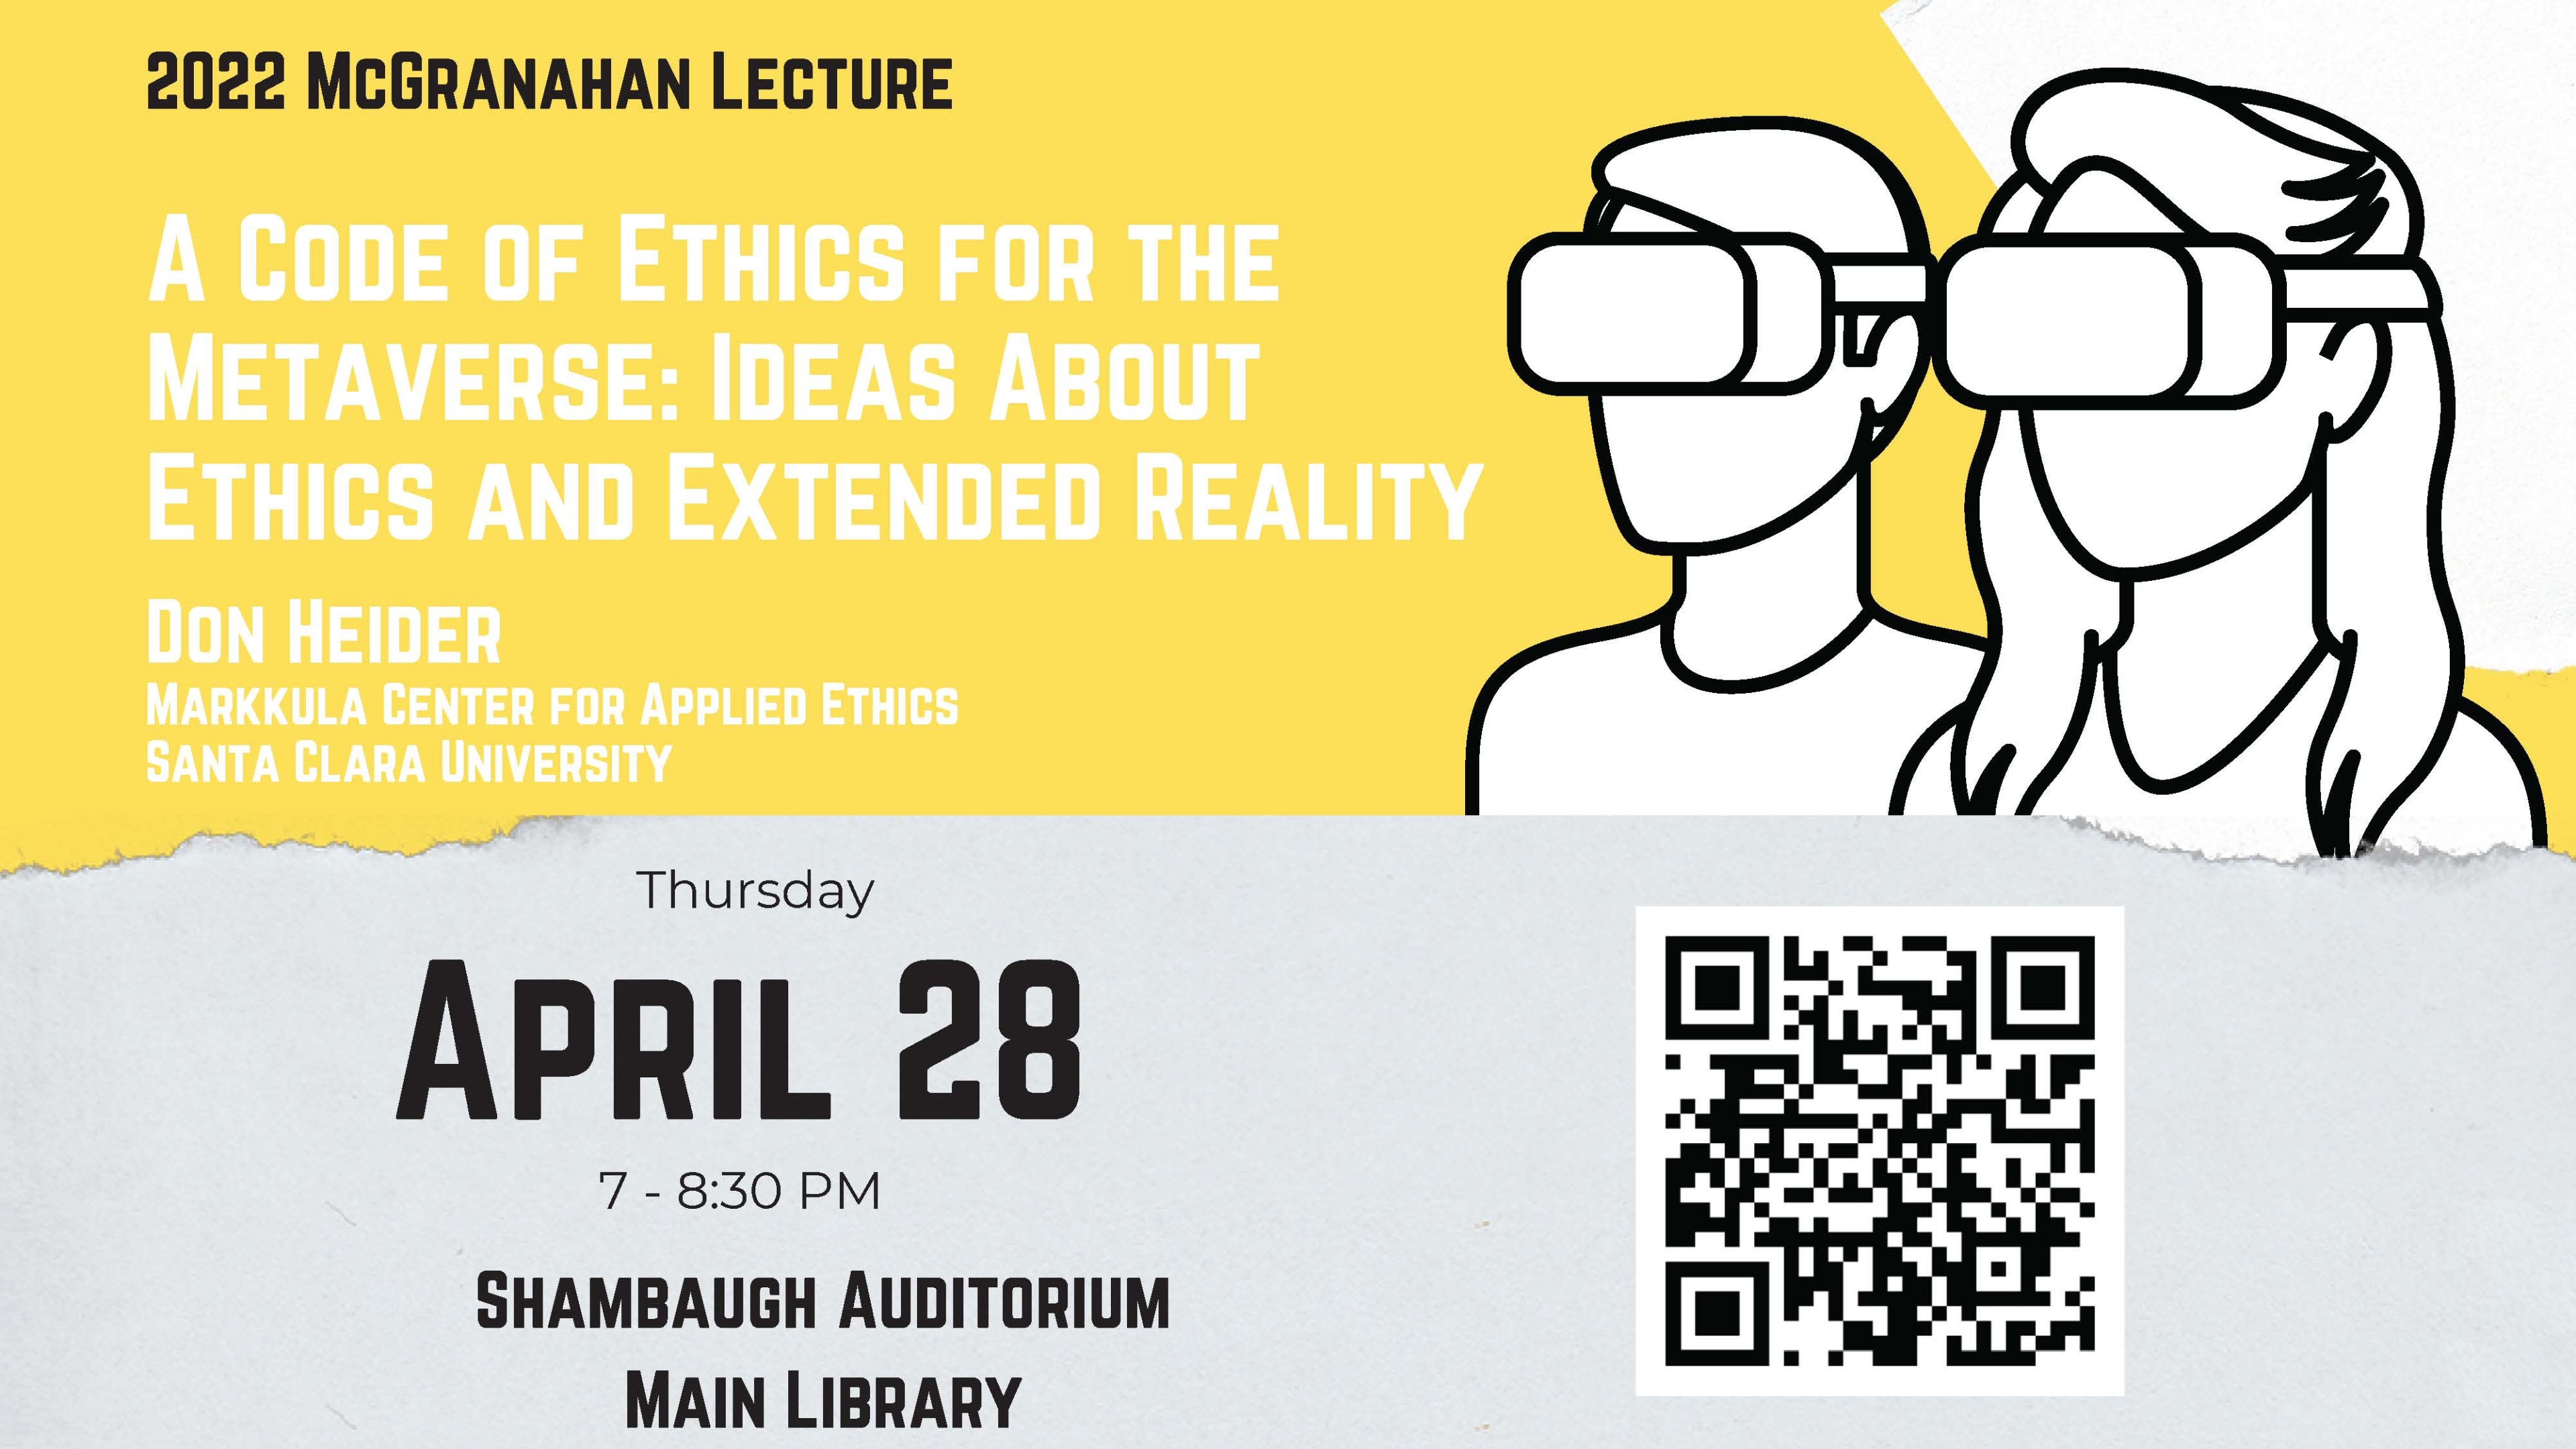 2022 MCGranahan Lecture April 28 7-8:30 PM Shambbaugh Auditorium Don Heider: A Code of Ethics for the Metaverse